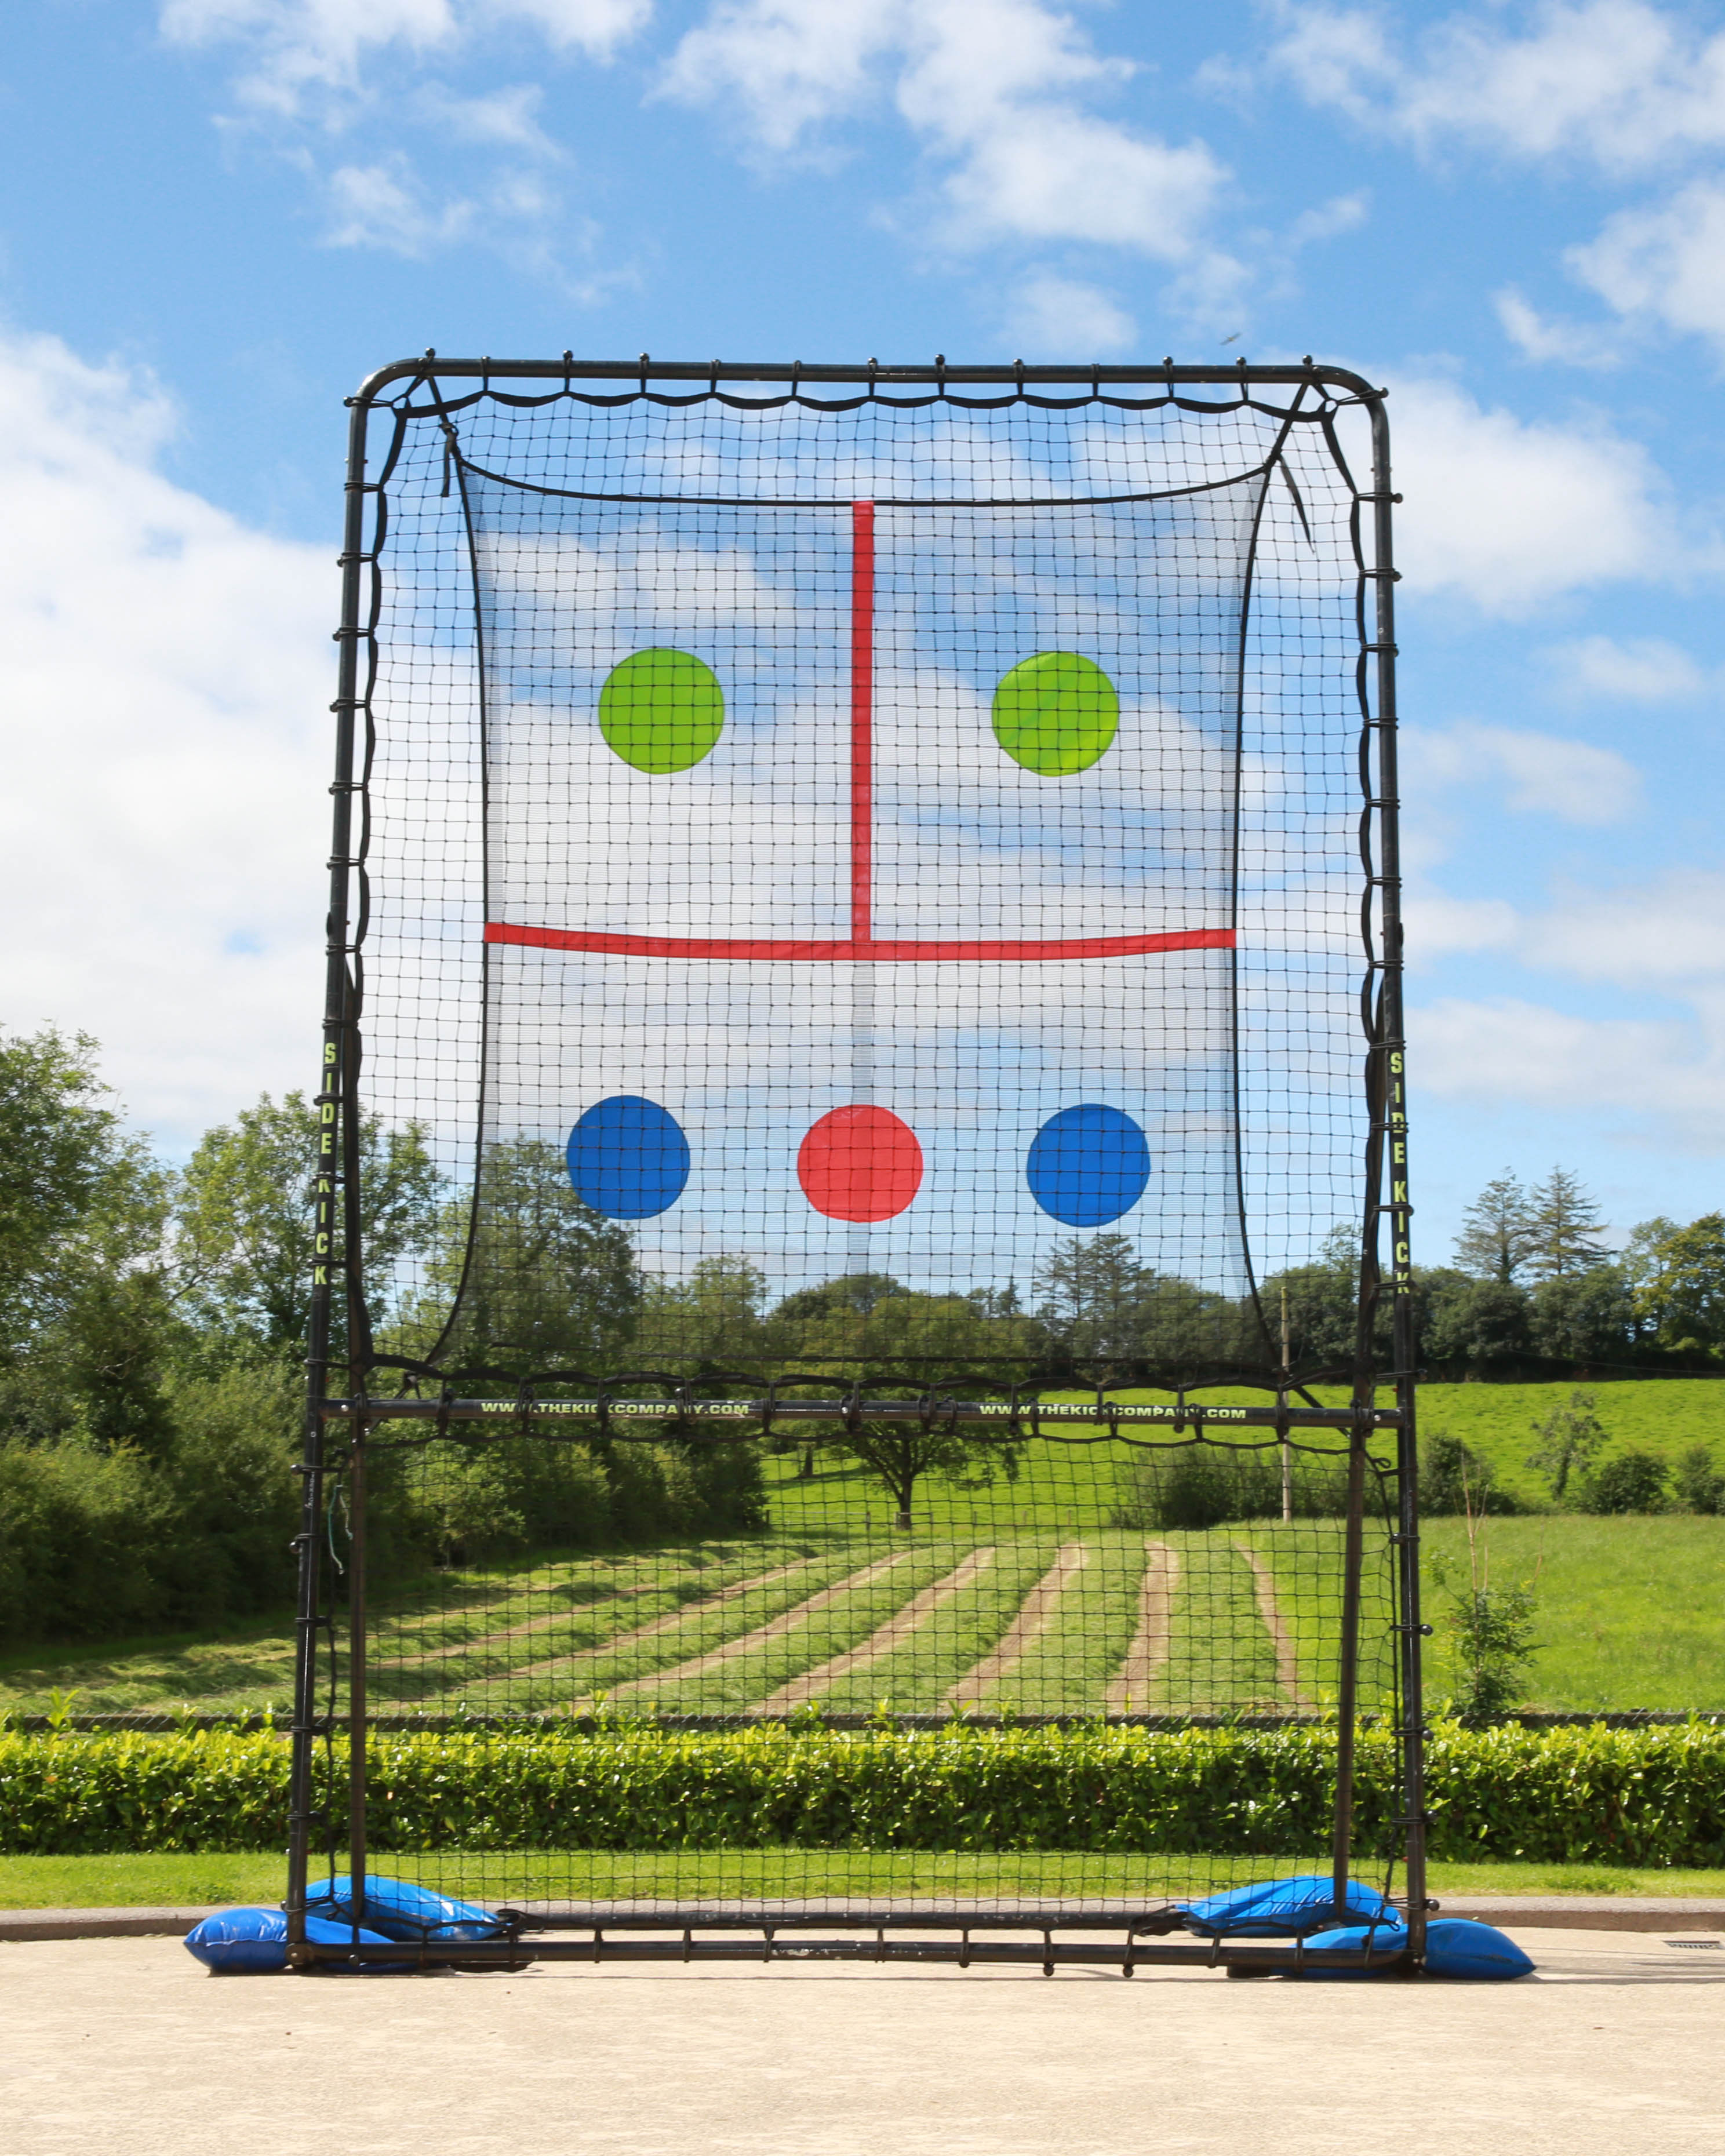 SkillMAster® Ball Rebounder - A home for creative ball sports skills play. Bridges the gap in generational development of player to support conssitent long-term focus of enjoyable practice.